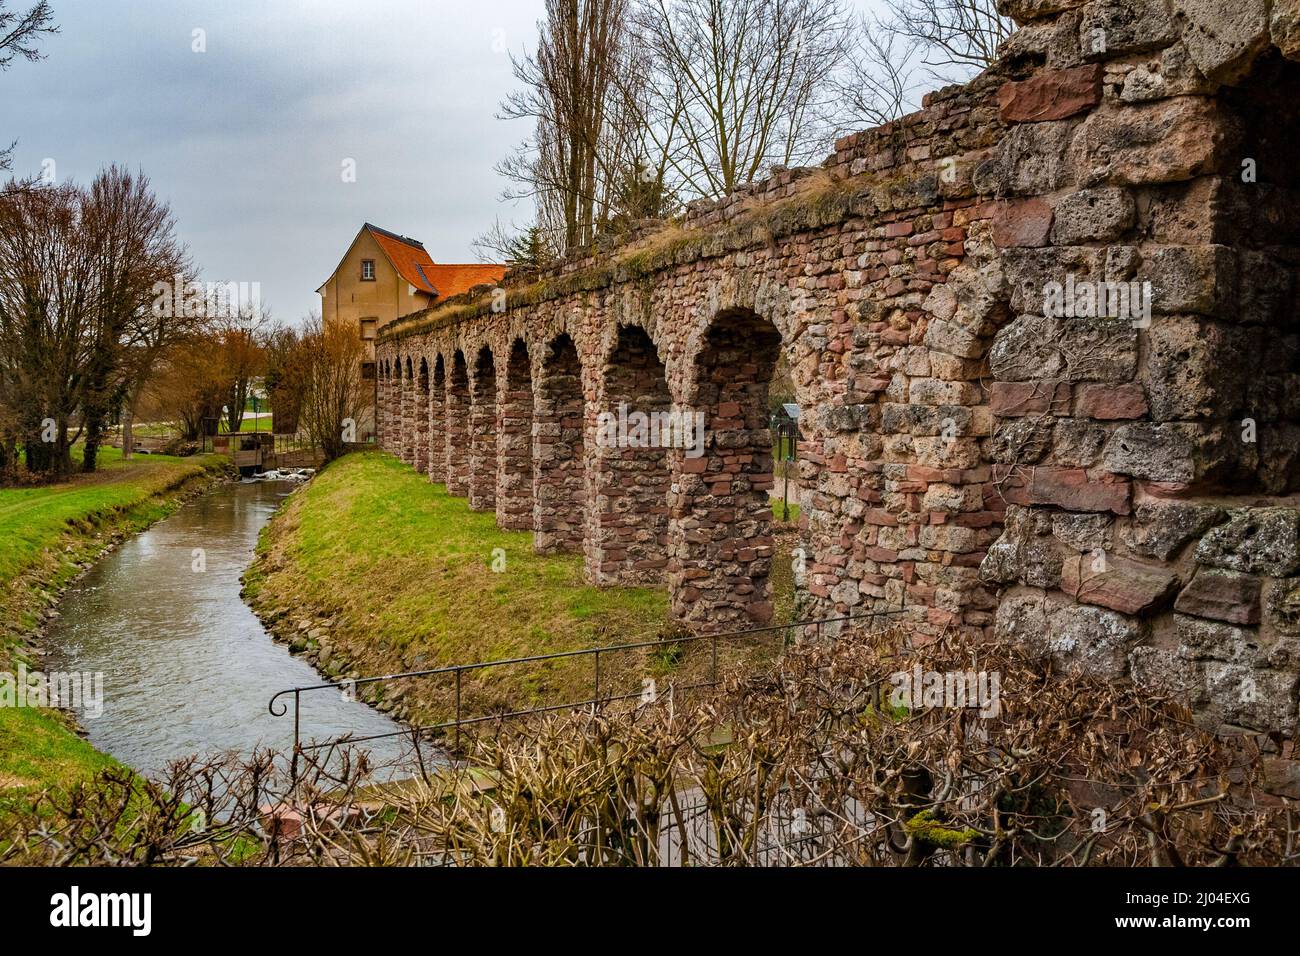 Gorgeous view of the arches of the artificial ruins of the Roman water aqueduct along the Leimbach stream which also serves as a boundary for the... Stock Photo